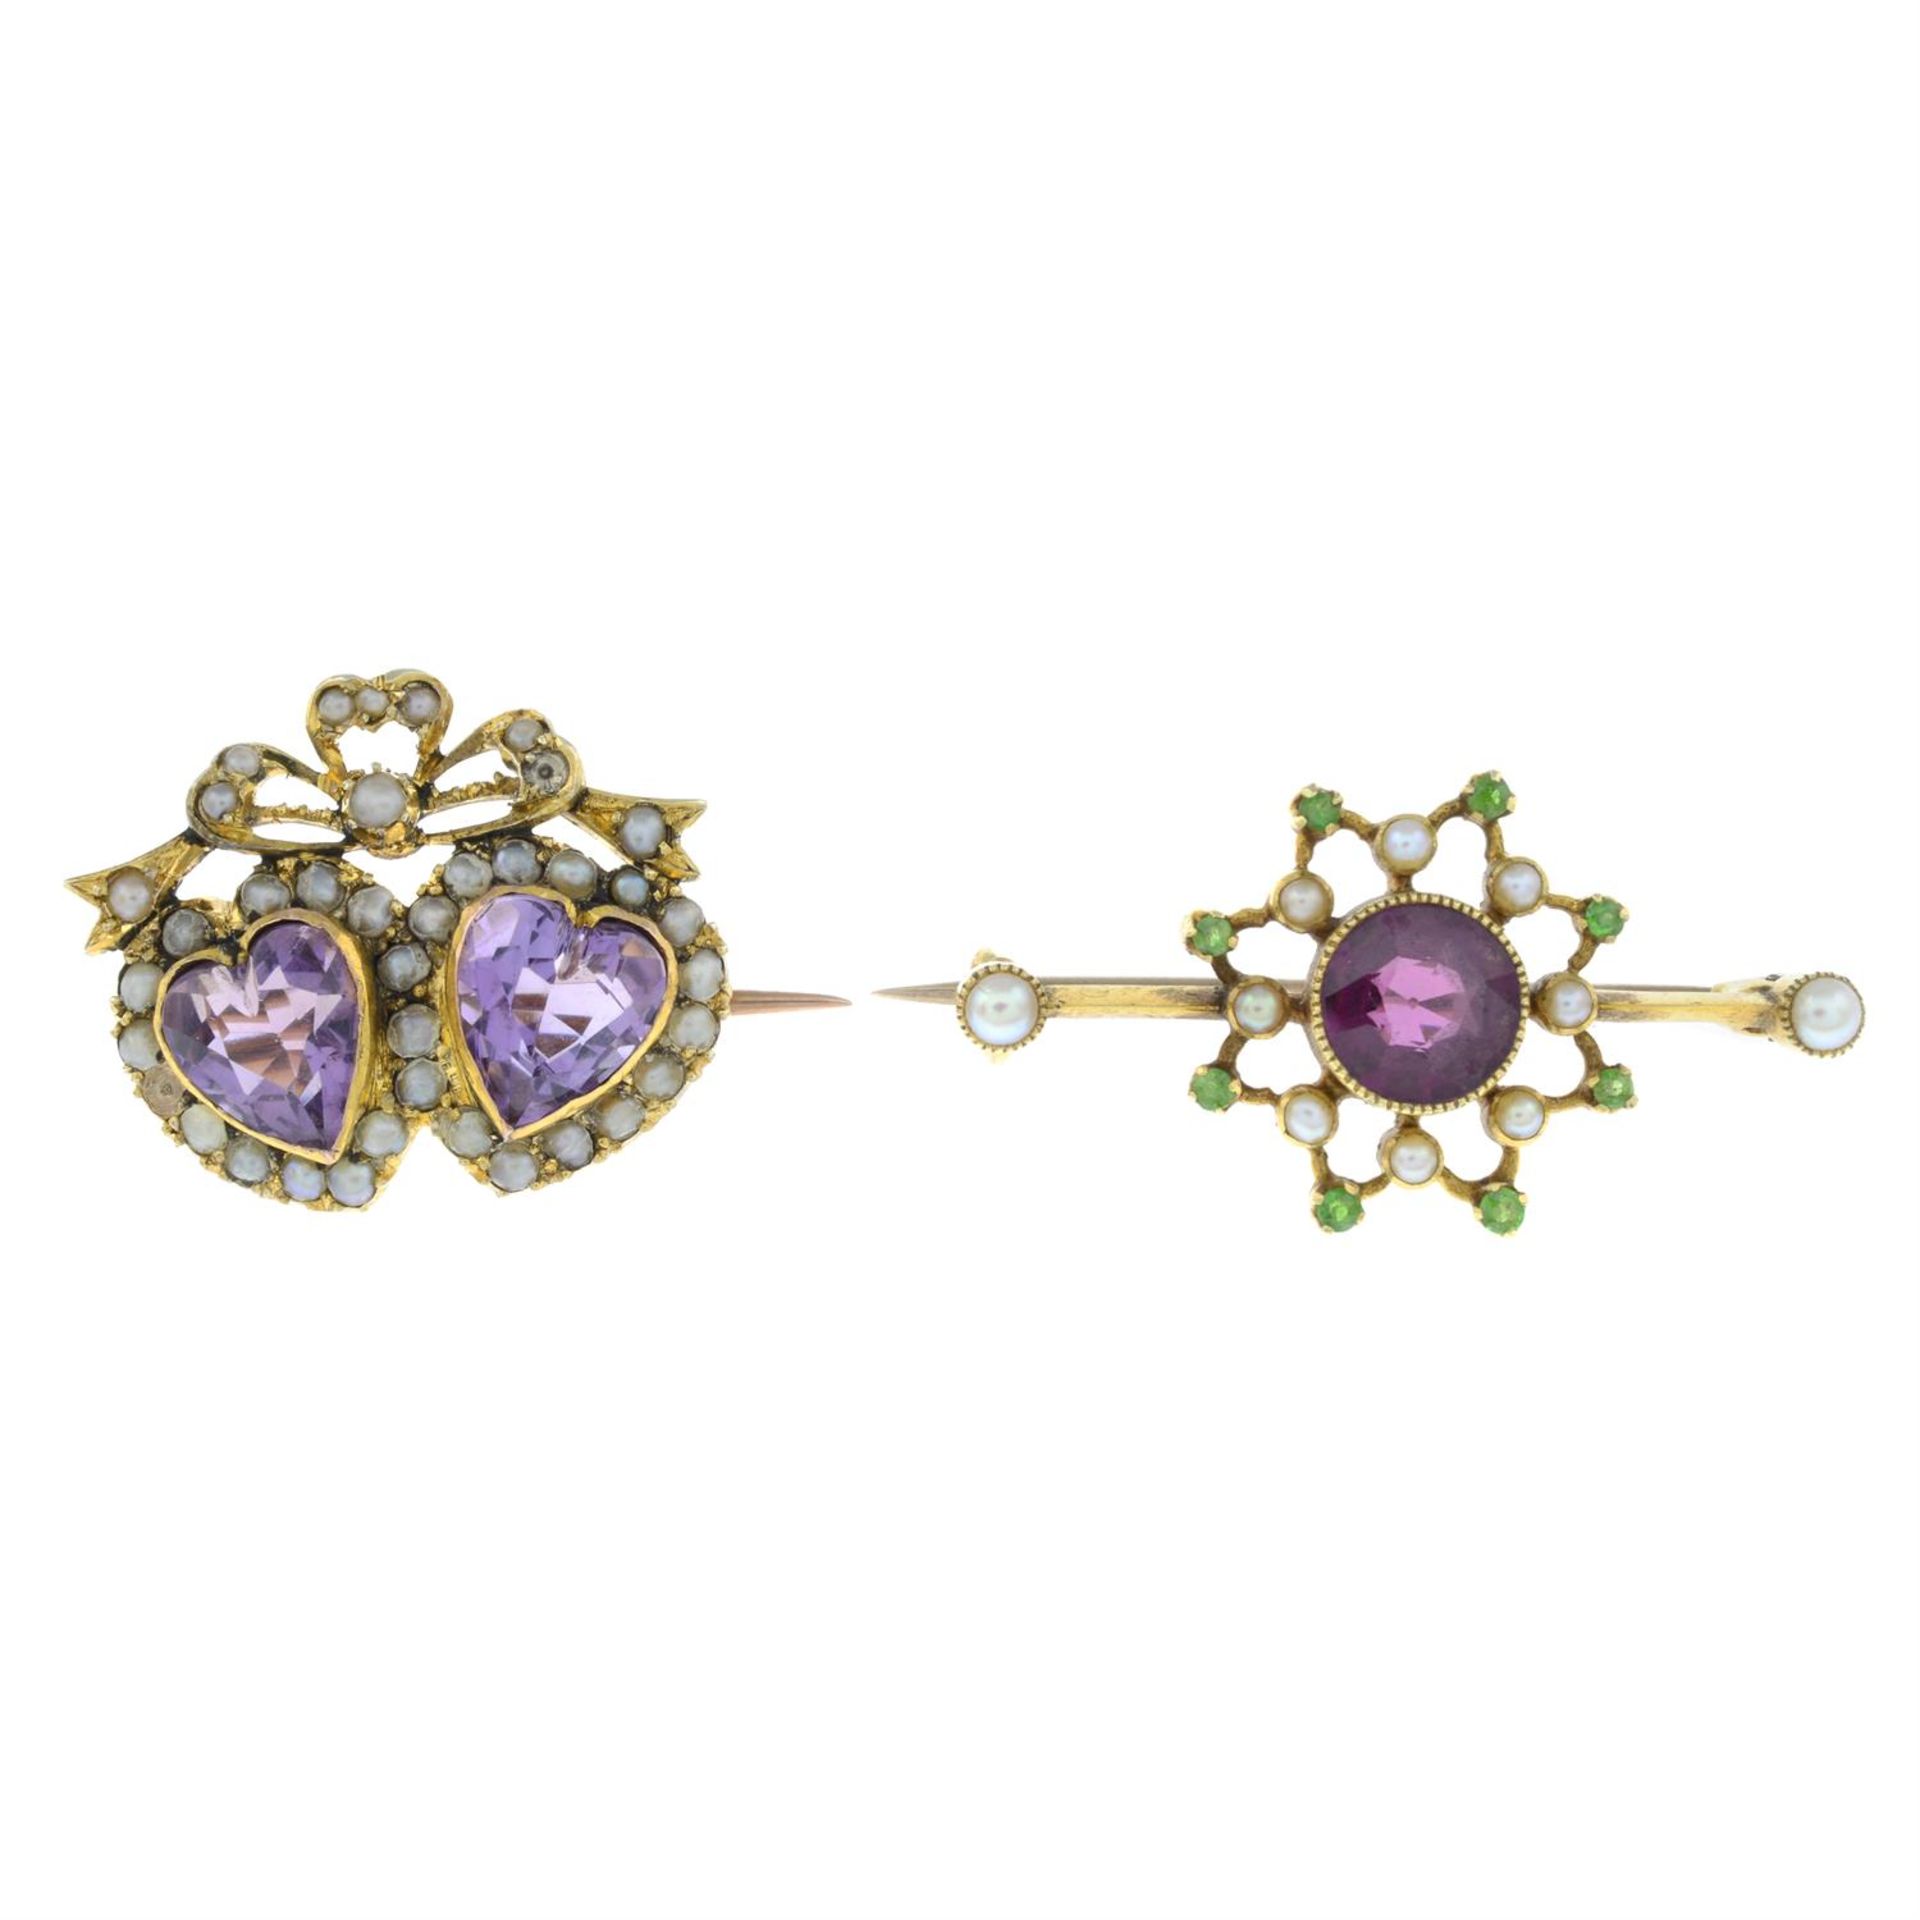 Two early 20th century gem-set brooches.